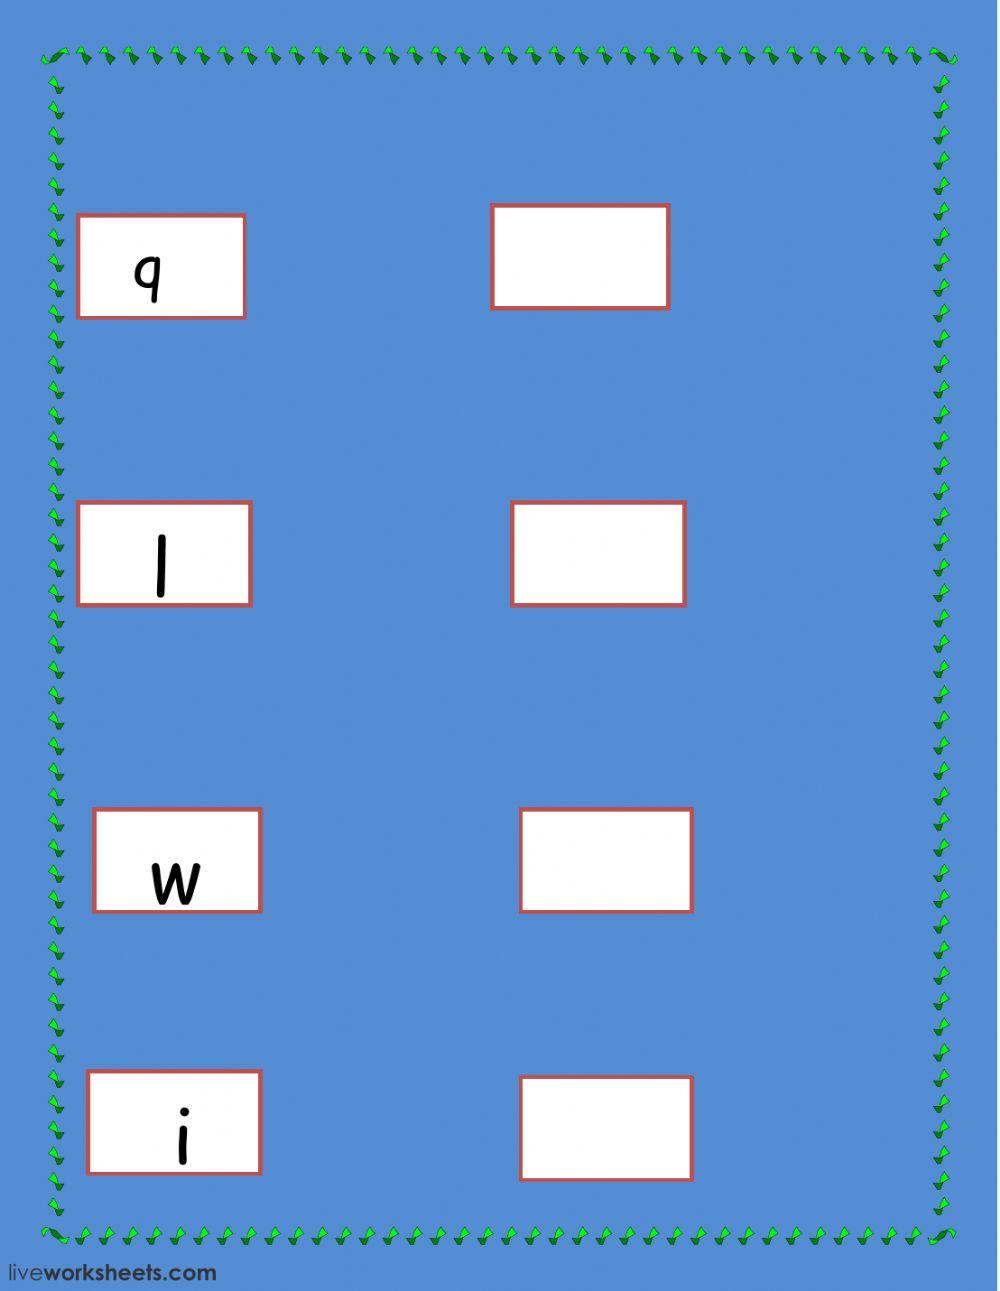 Typing activity 1